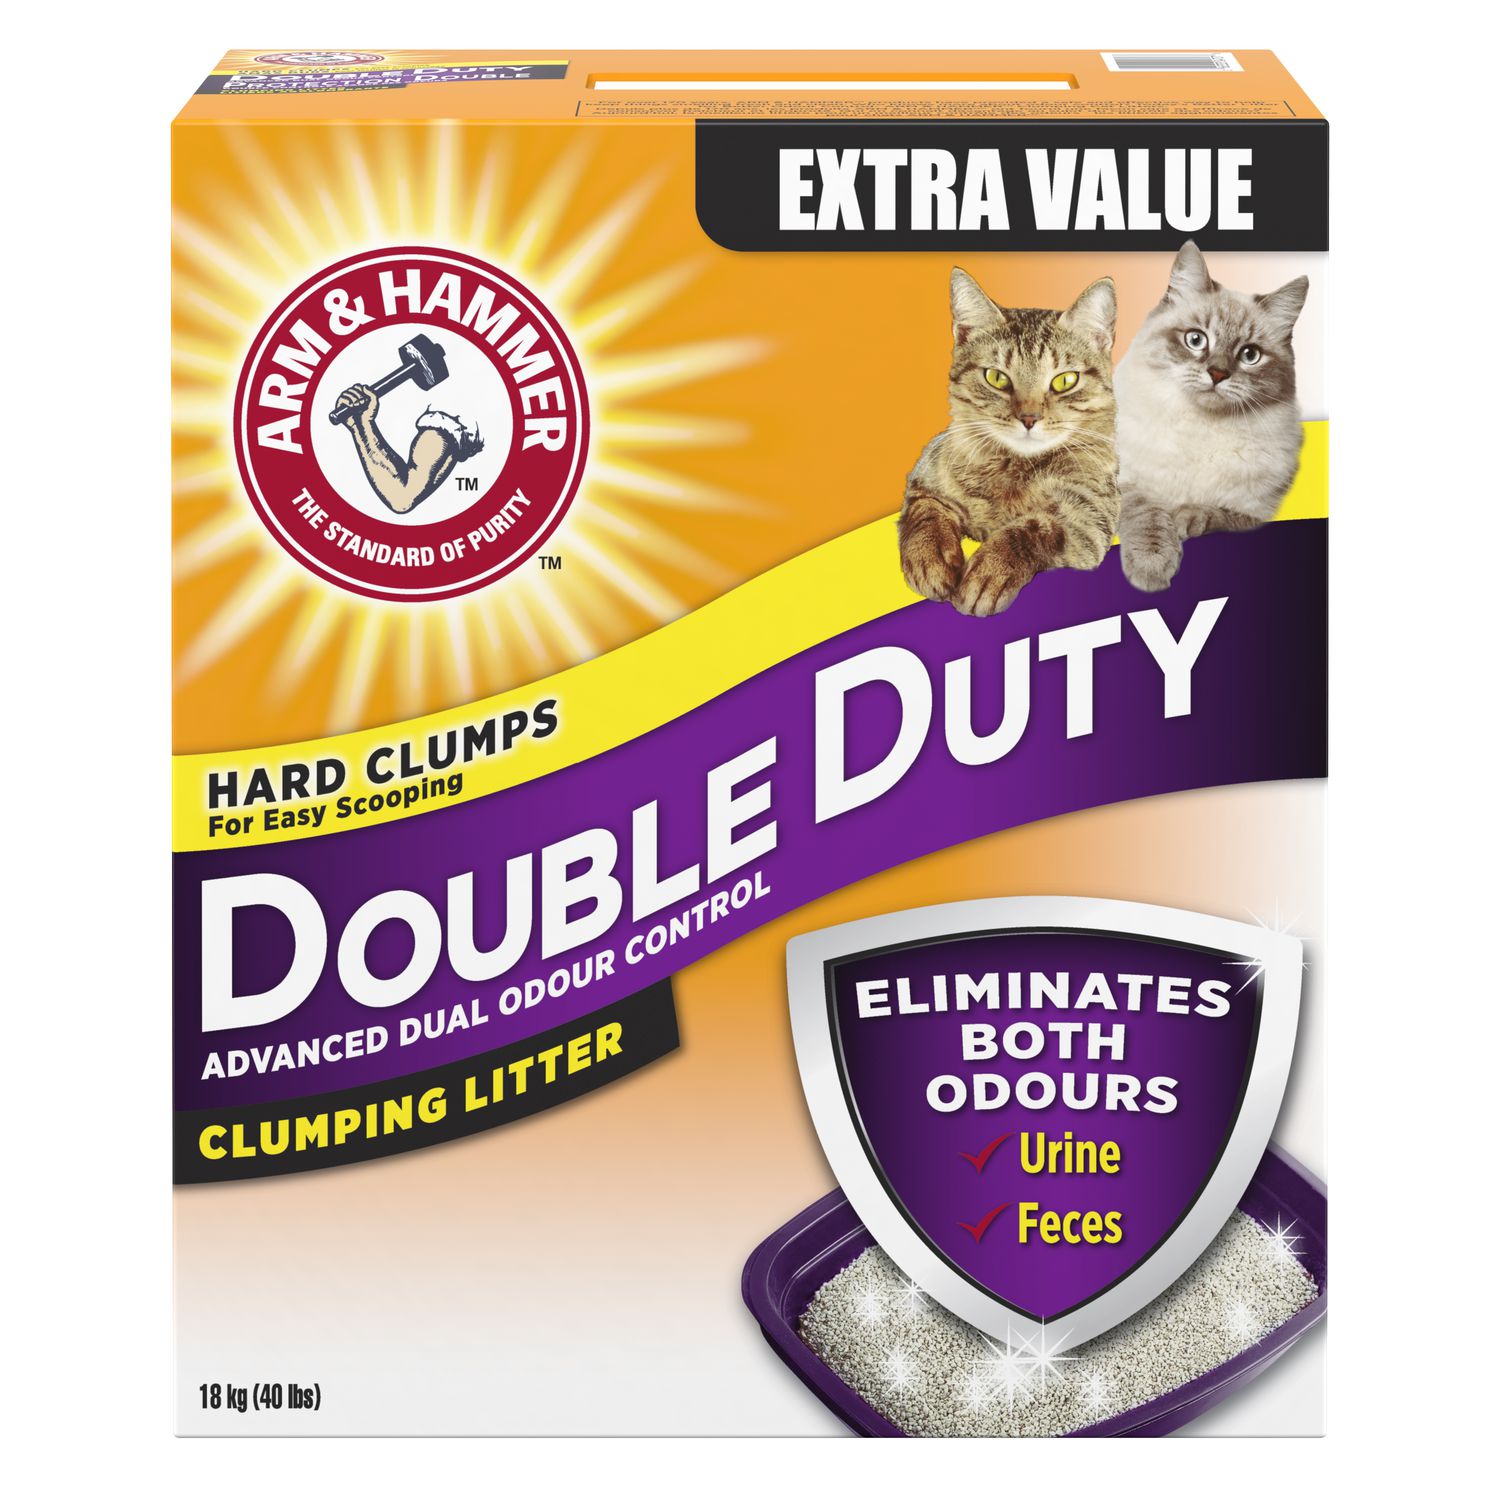 Arm & Hammer Double Duty Advanced Odour Control Clumping CAT Litter